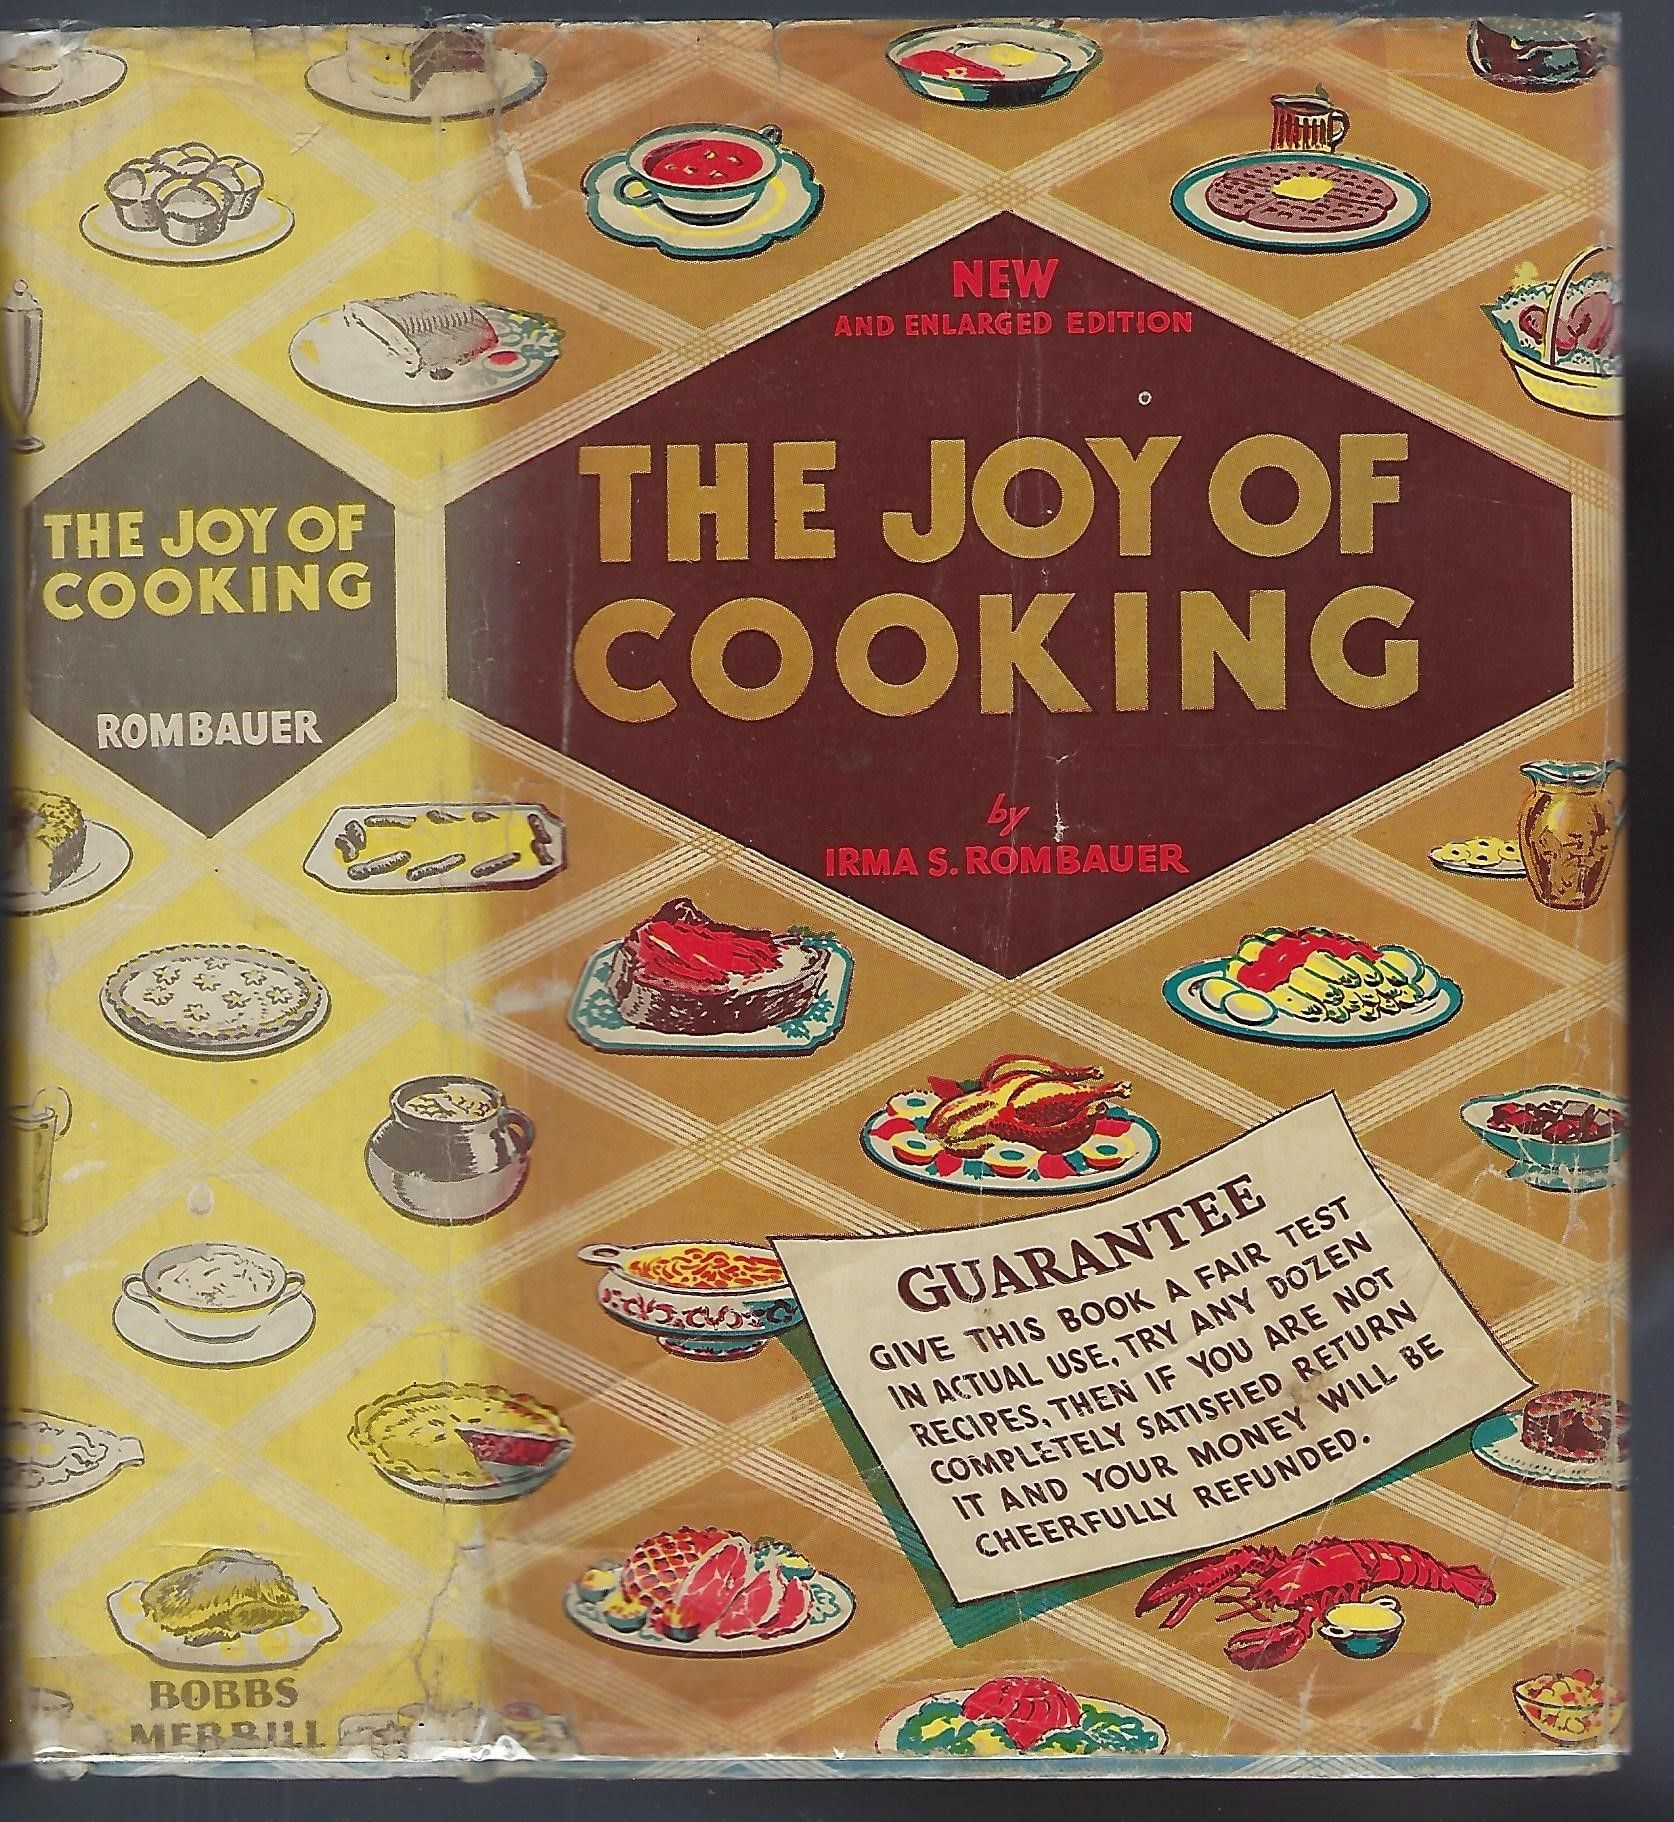 Dust jacket for the 1943 edition of Joy of Cooking.